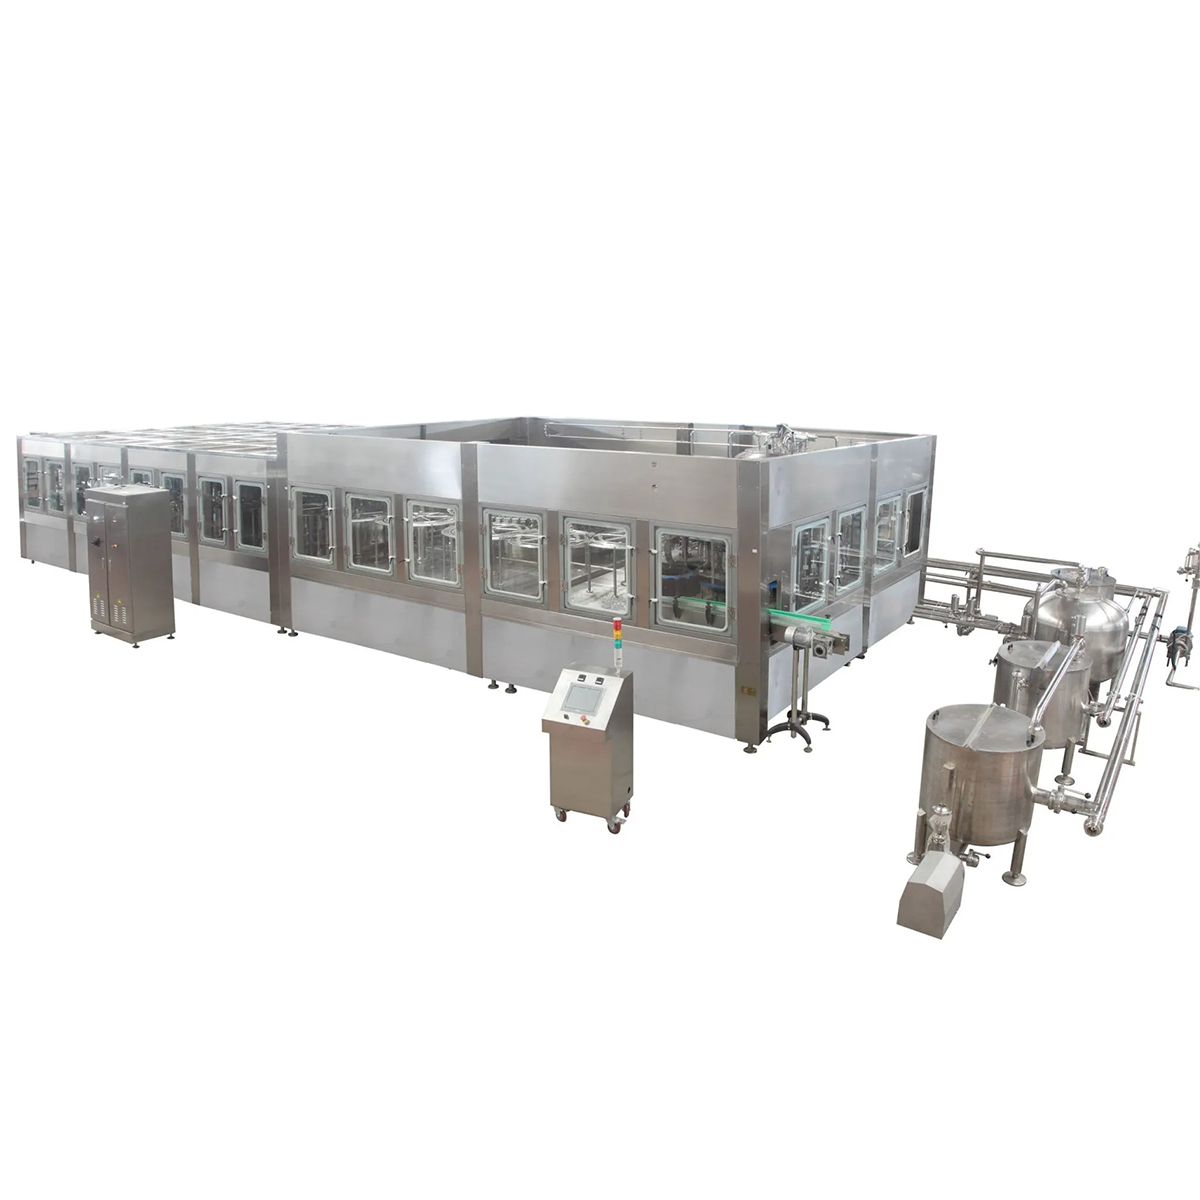 High-Quality Water Filling Machine Manufacturer – HZM Machinery’s Professional Solutions